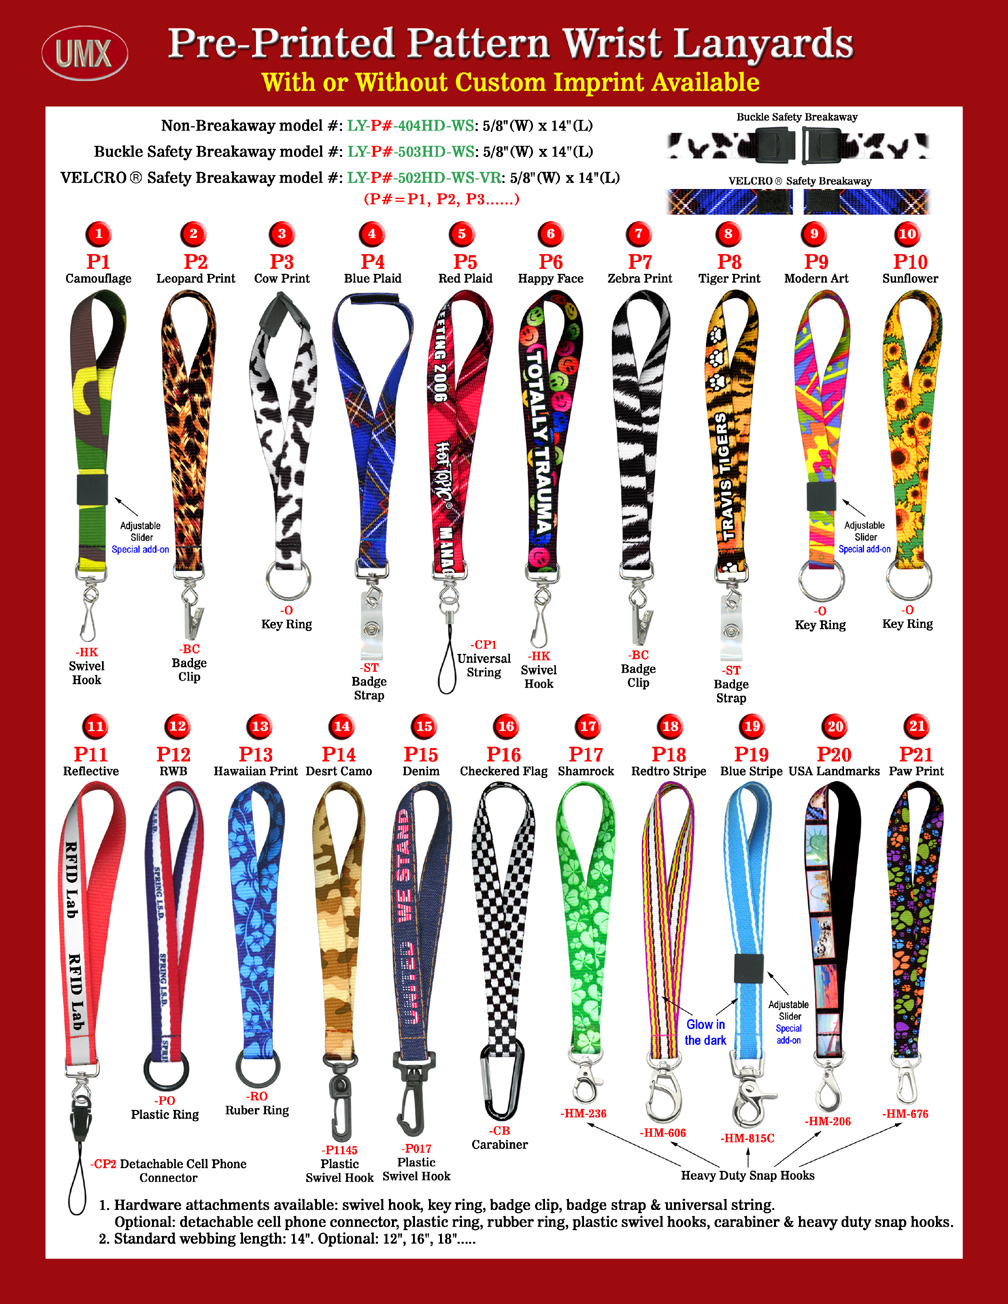 The sewn-on unique and cool designed 5/8" pre-printed pattern wrist lanyards are designed for custom order or custom printed logo.